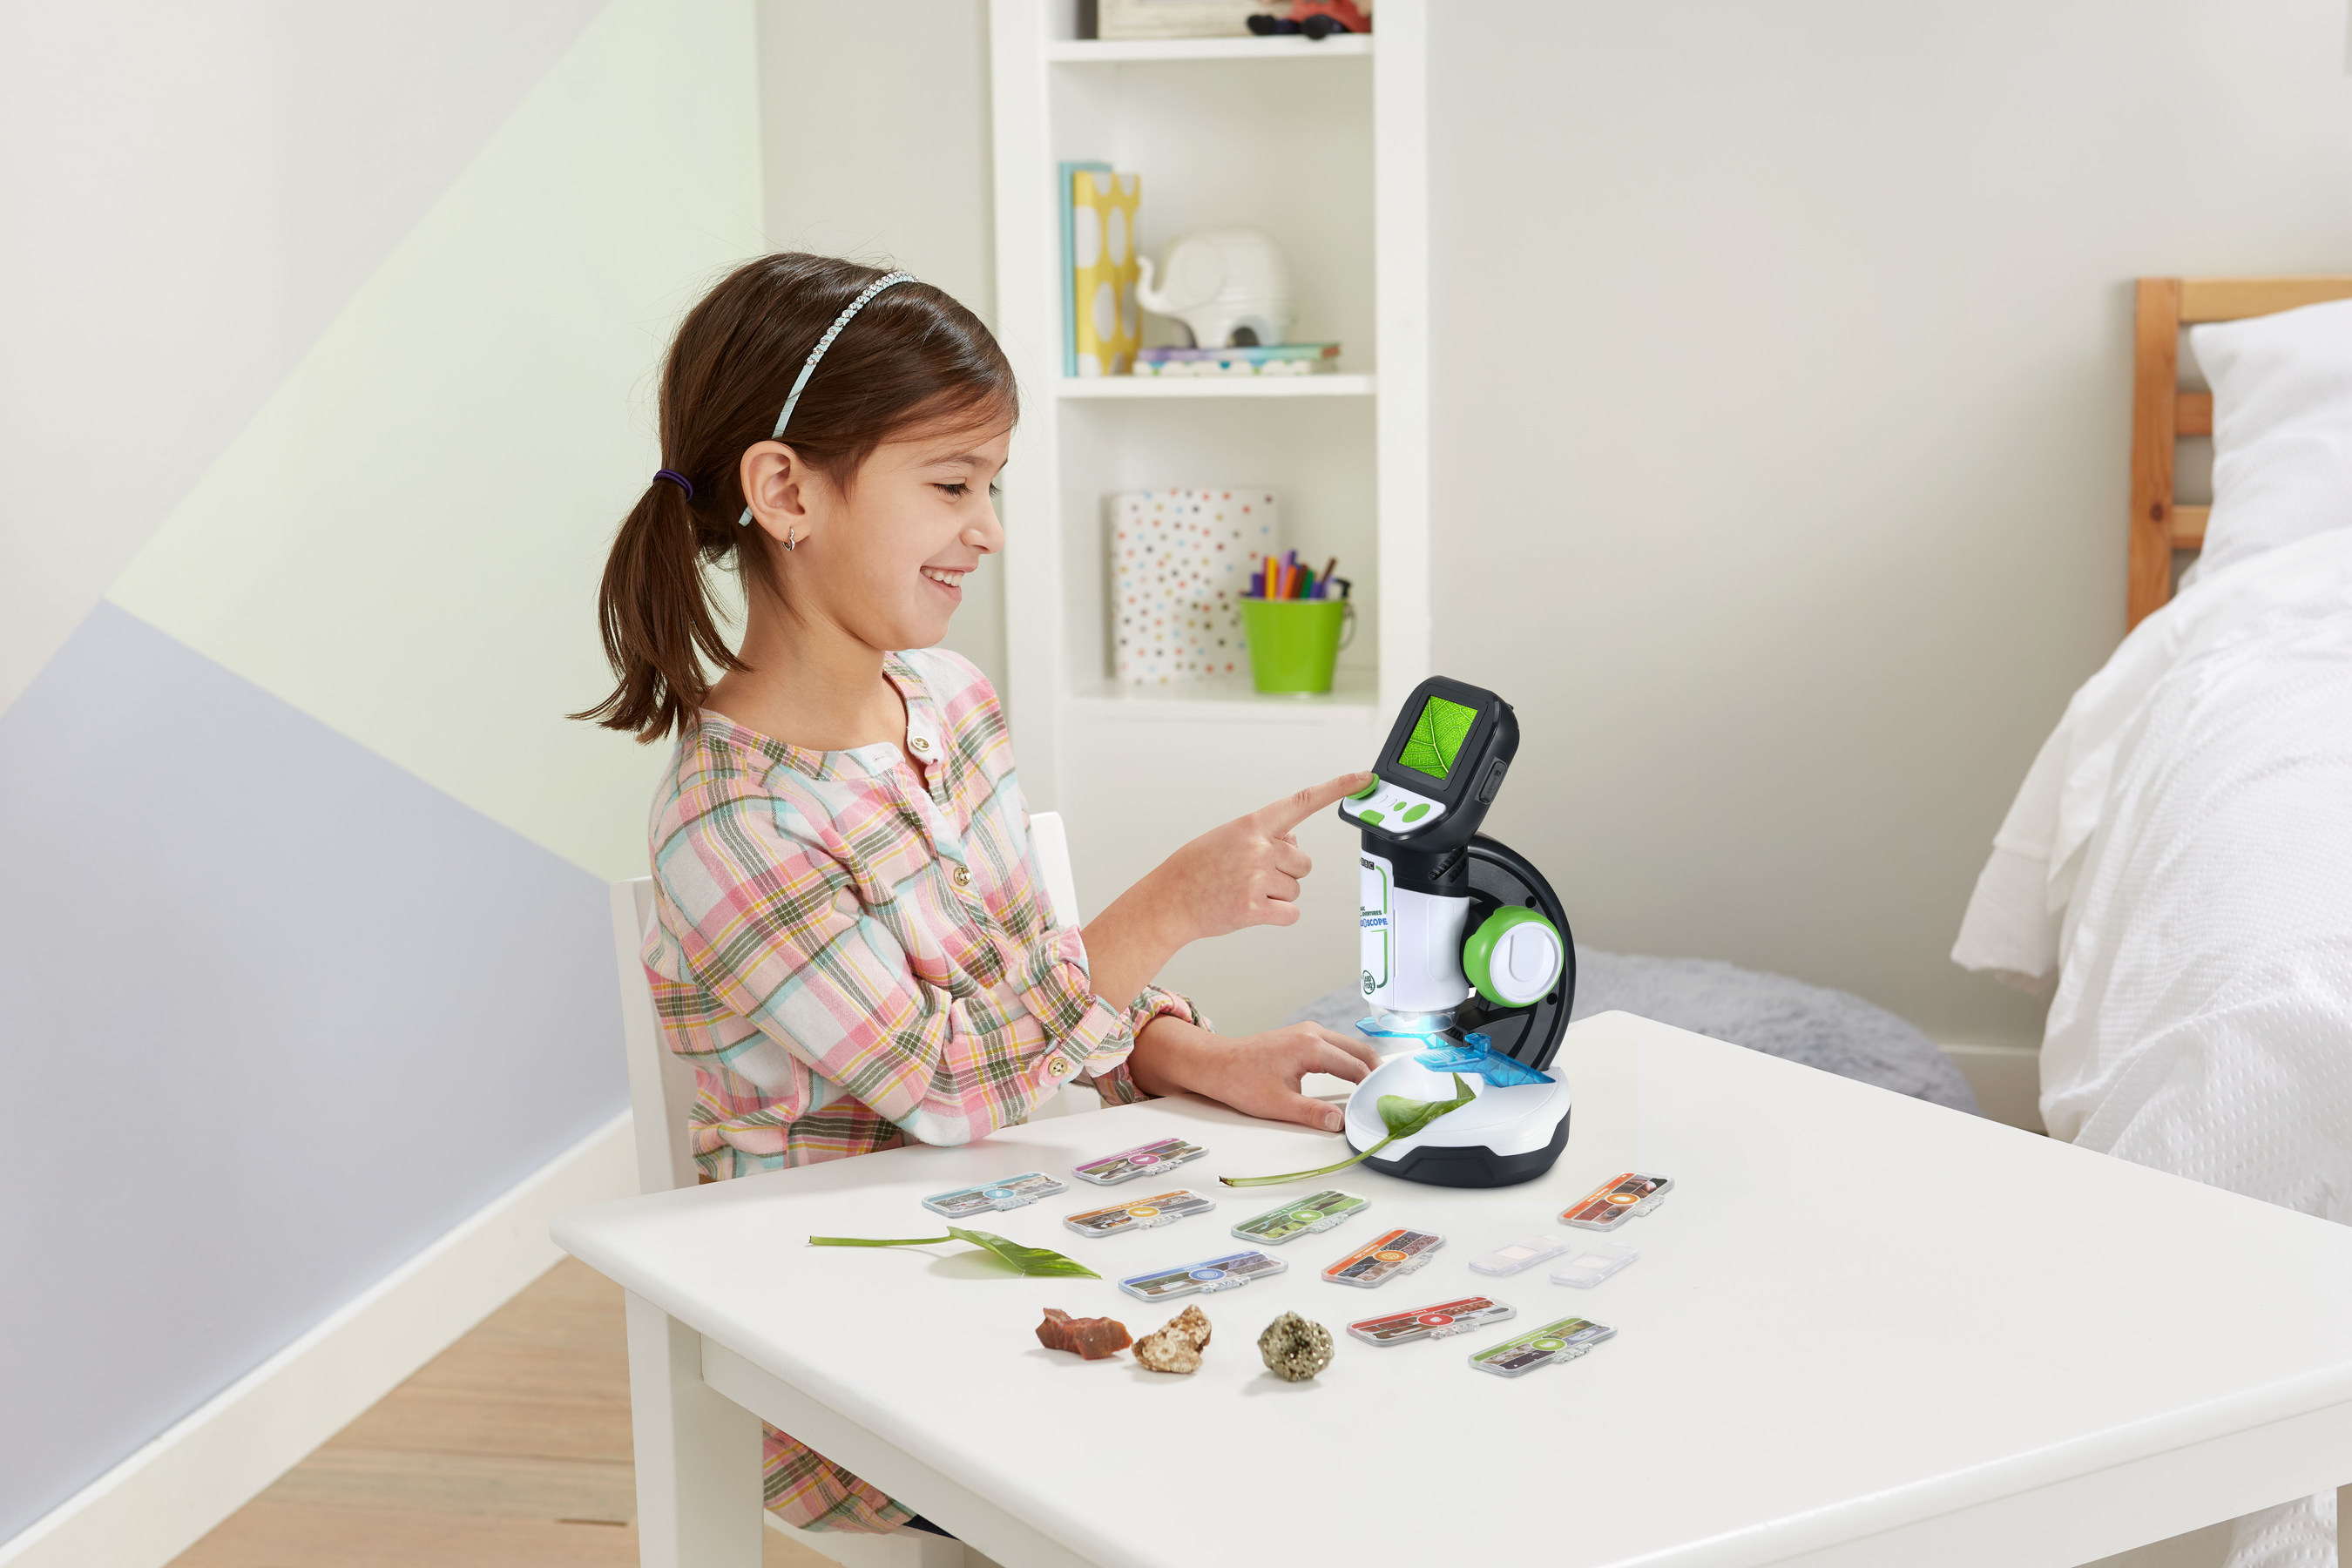 New Interactive Learning Toys from LeapFrog Available Now